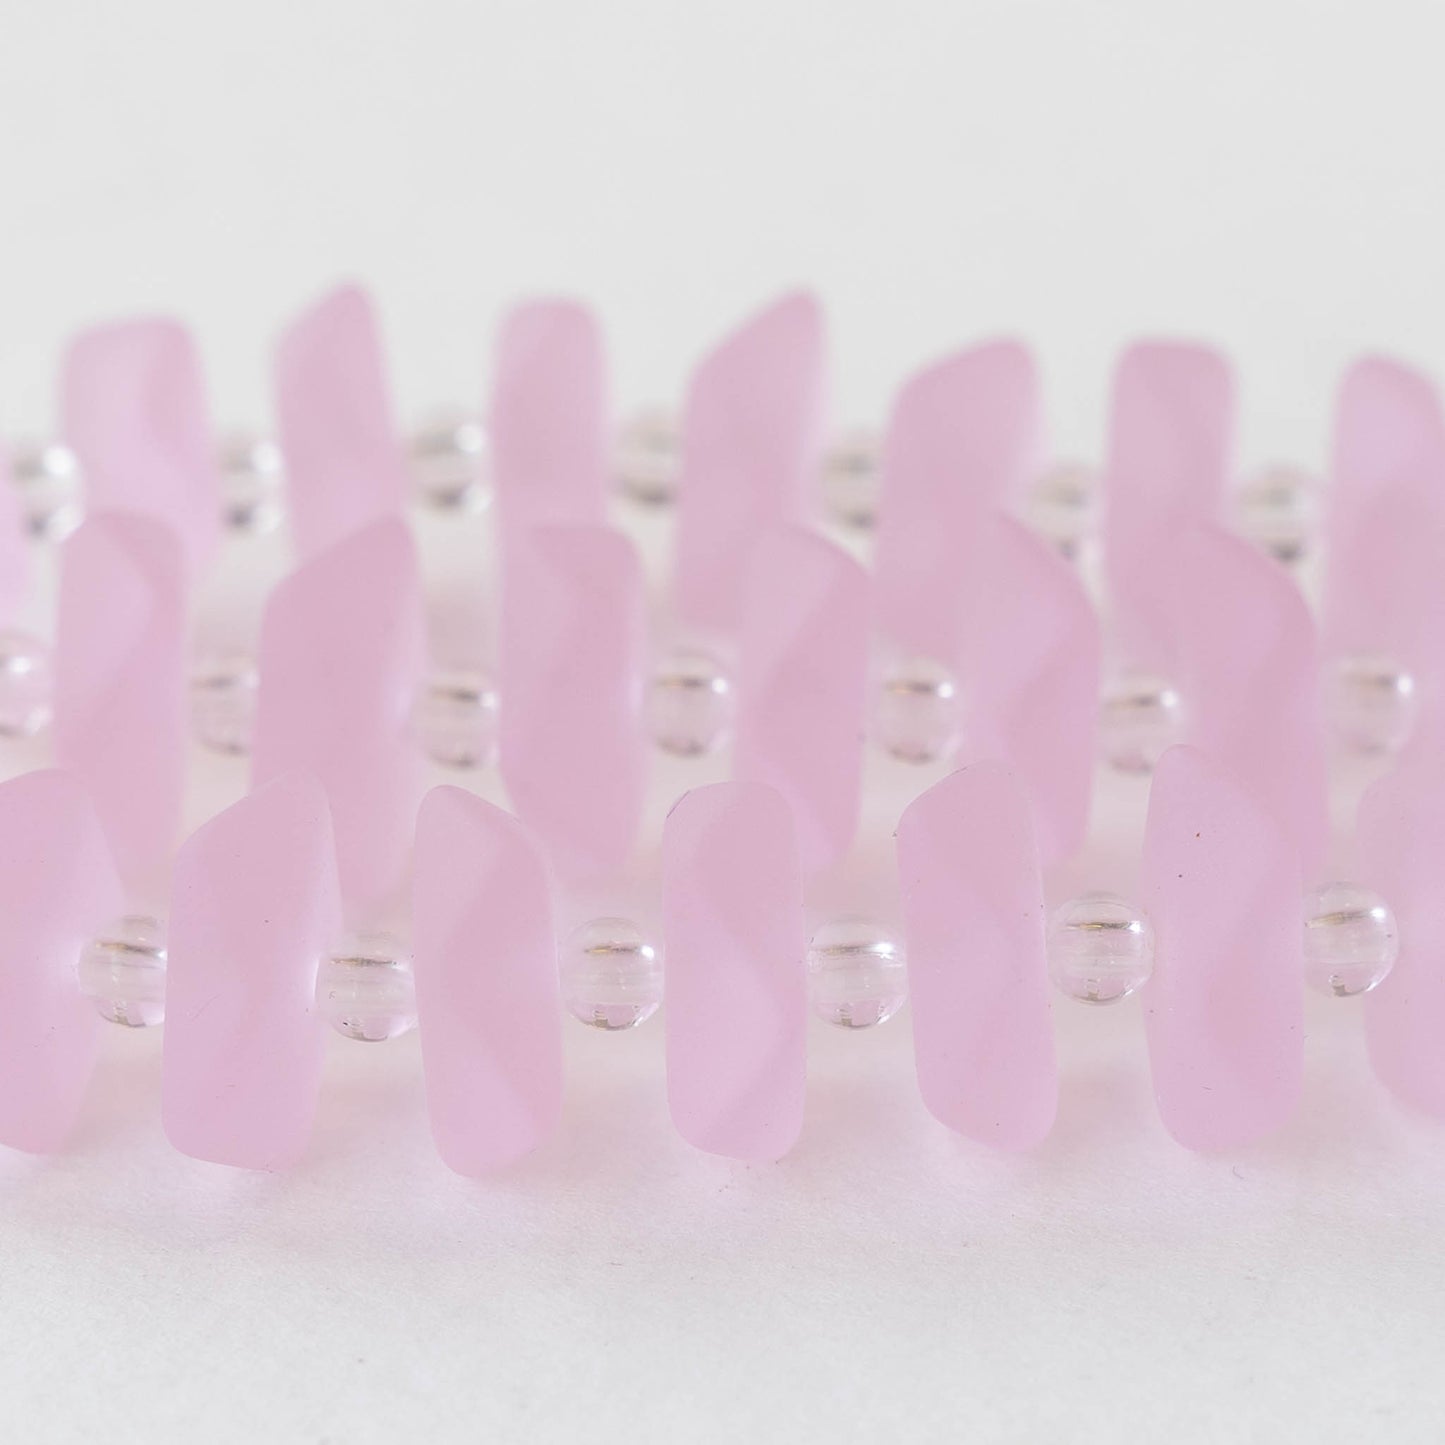 14mm Wavy Rondelle - Pink - 10 Beads